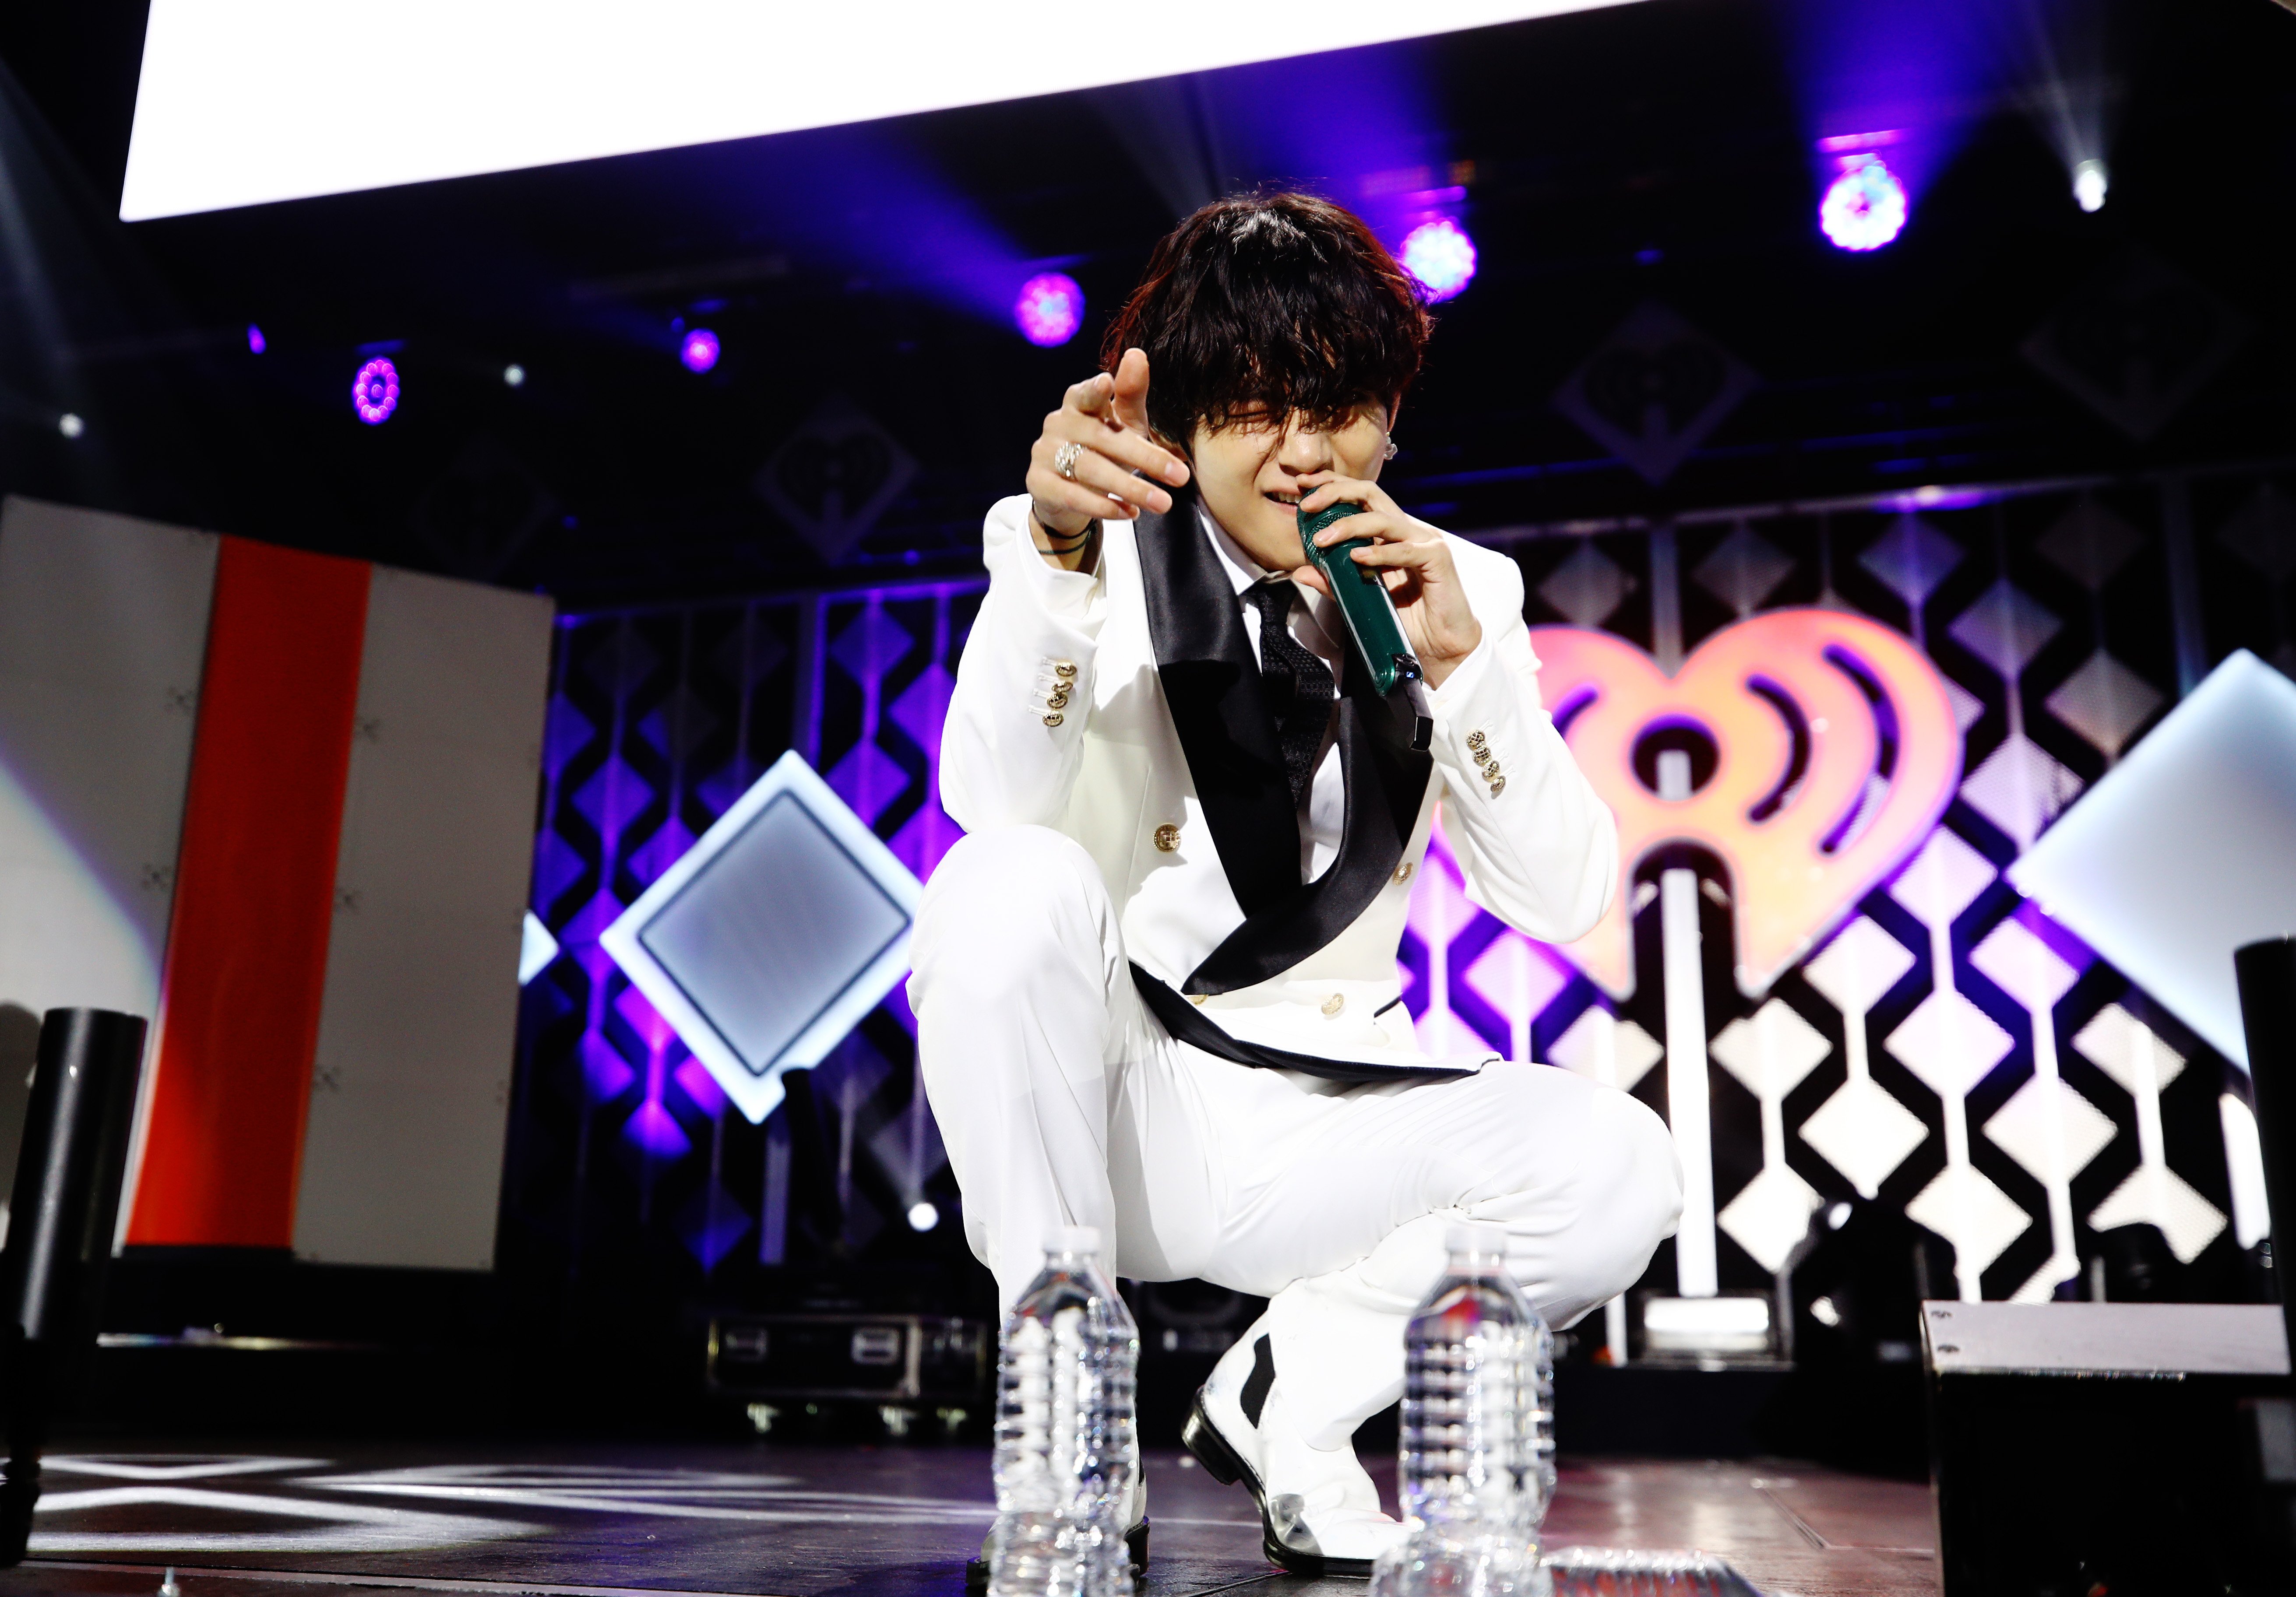 V of BTS performs onstage during 102.7 KIIS FM's Jingle Ball 2019 in white suit